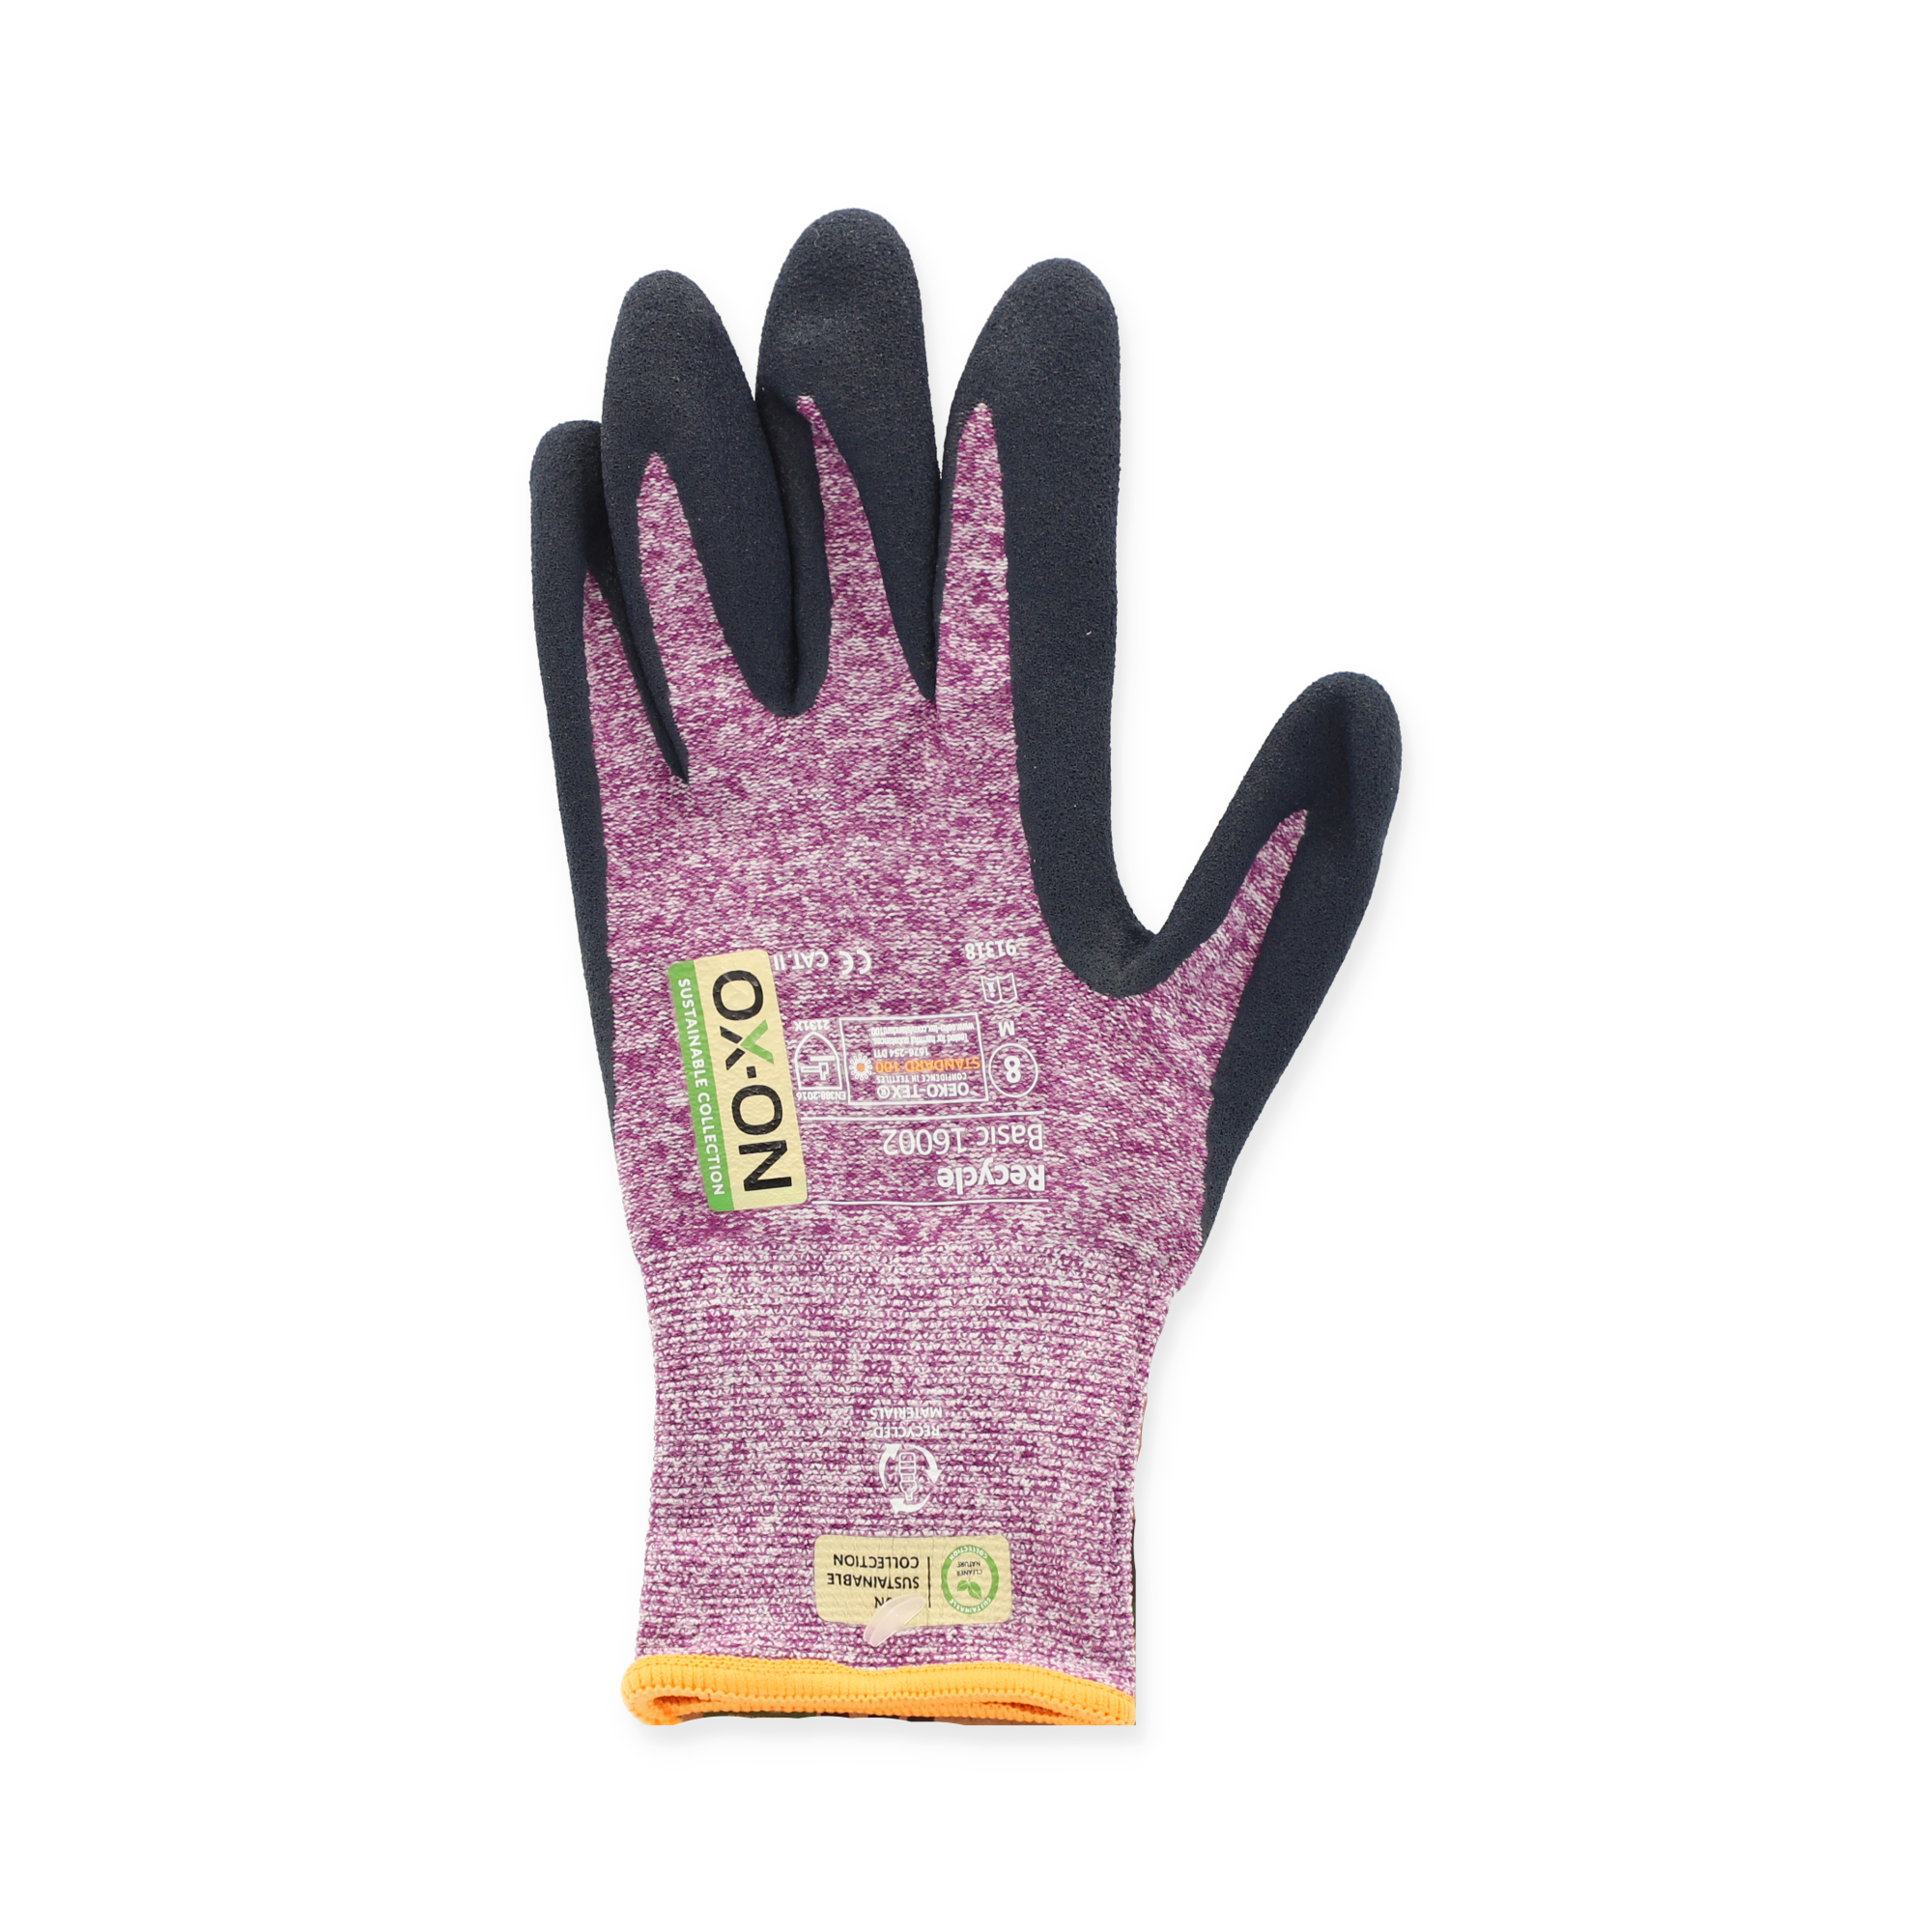 Handschuhe 'Recycle Basic 16002' violett Gr. 8 + product picture